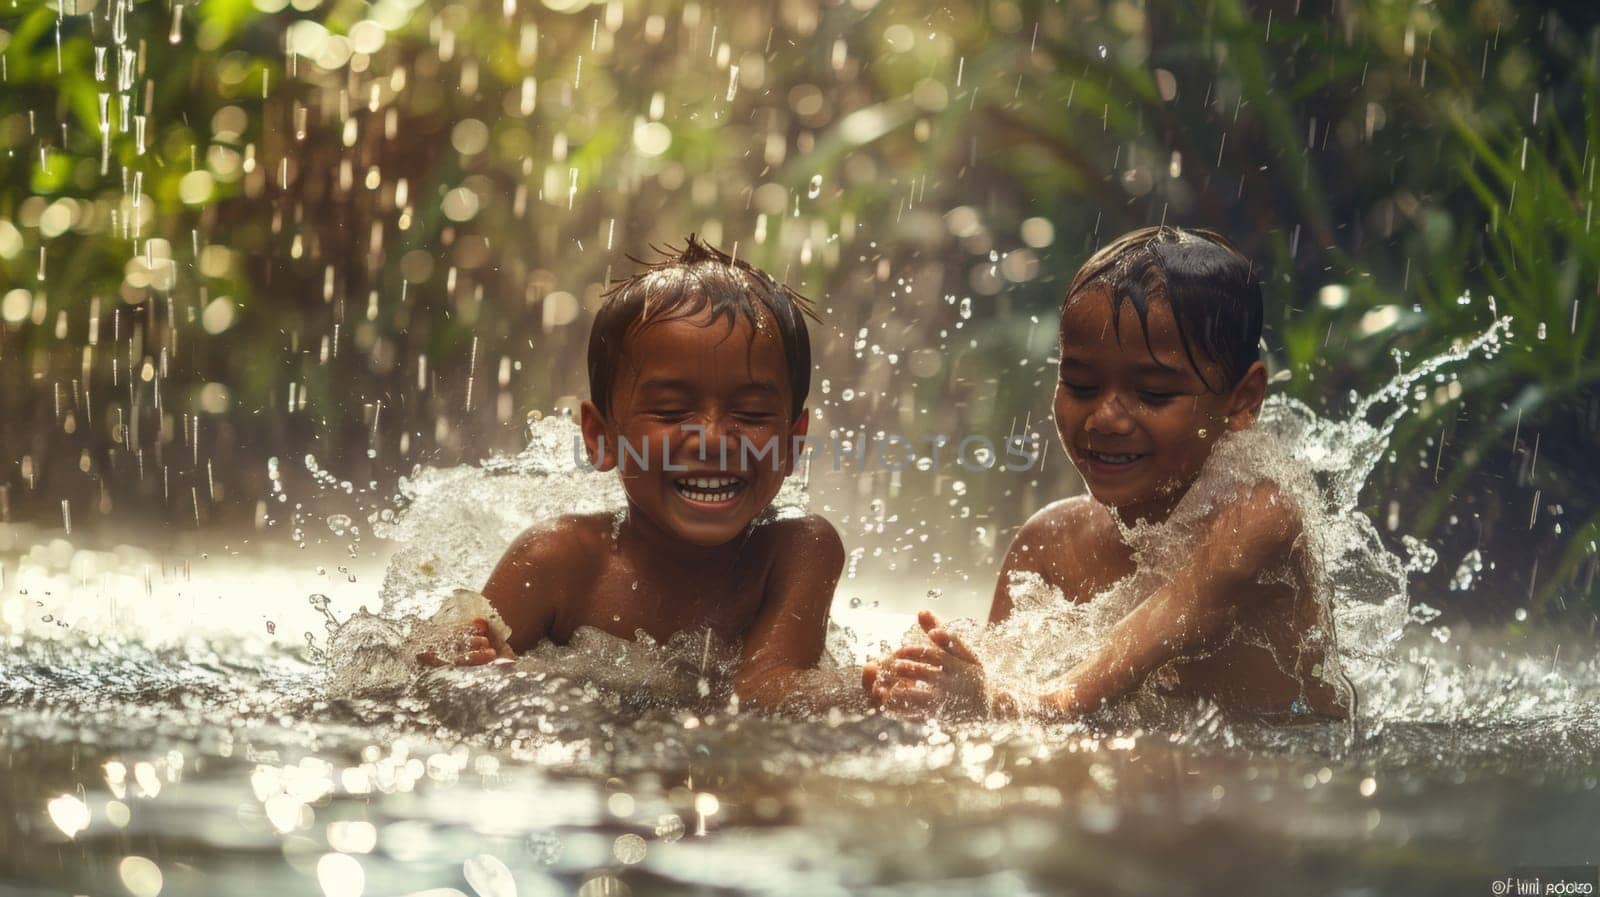 Two young boys playing in the water with a smile on their faces